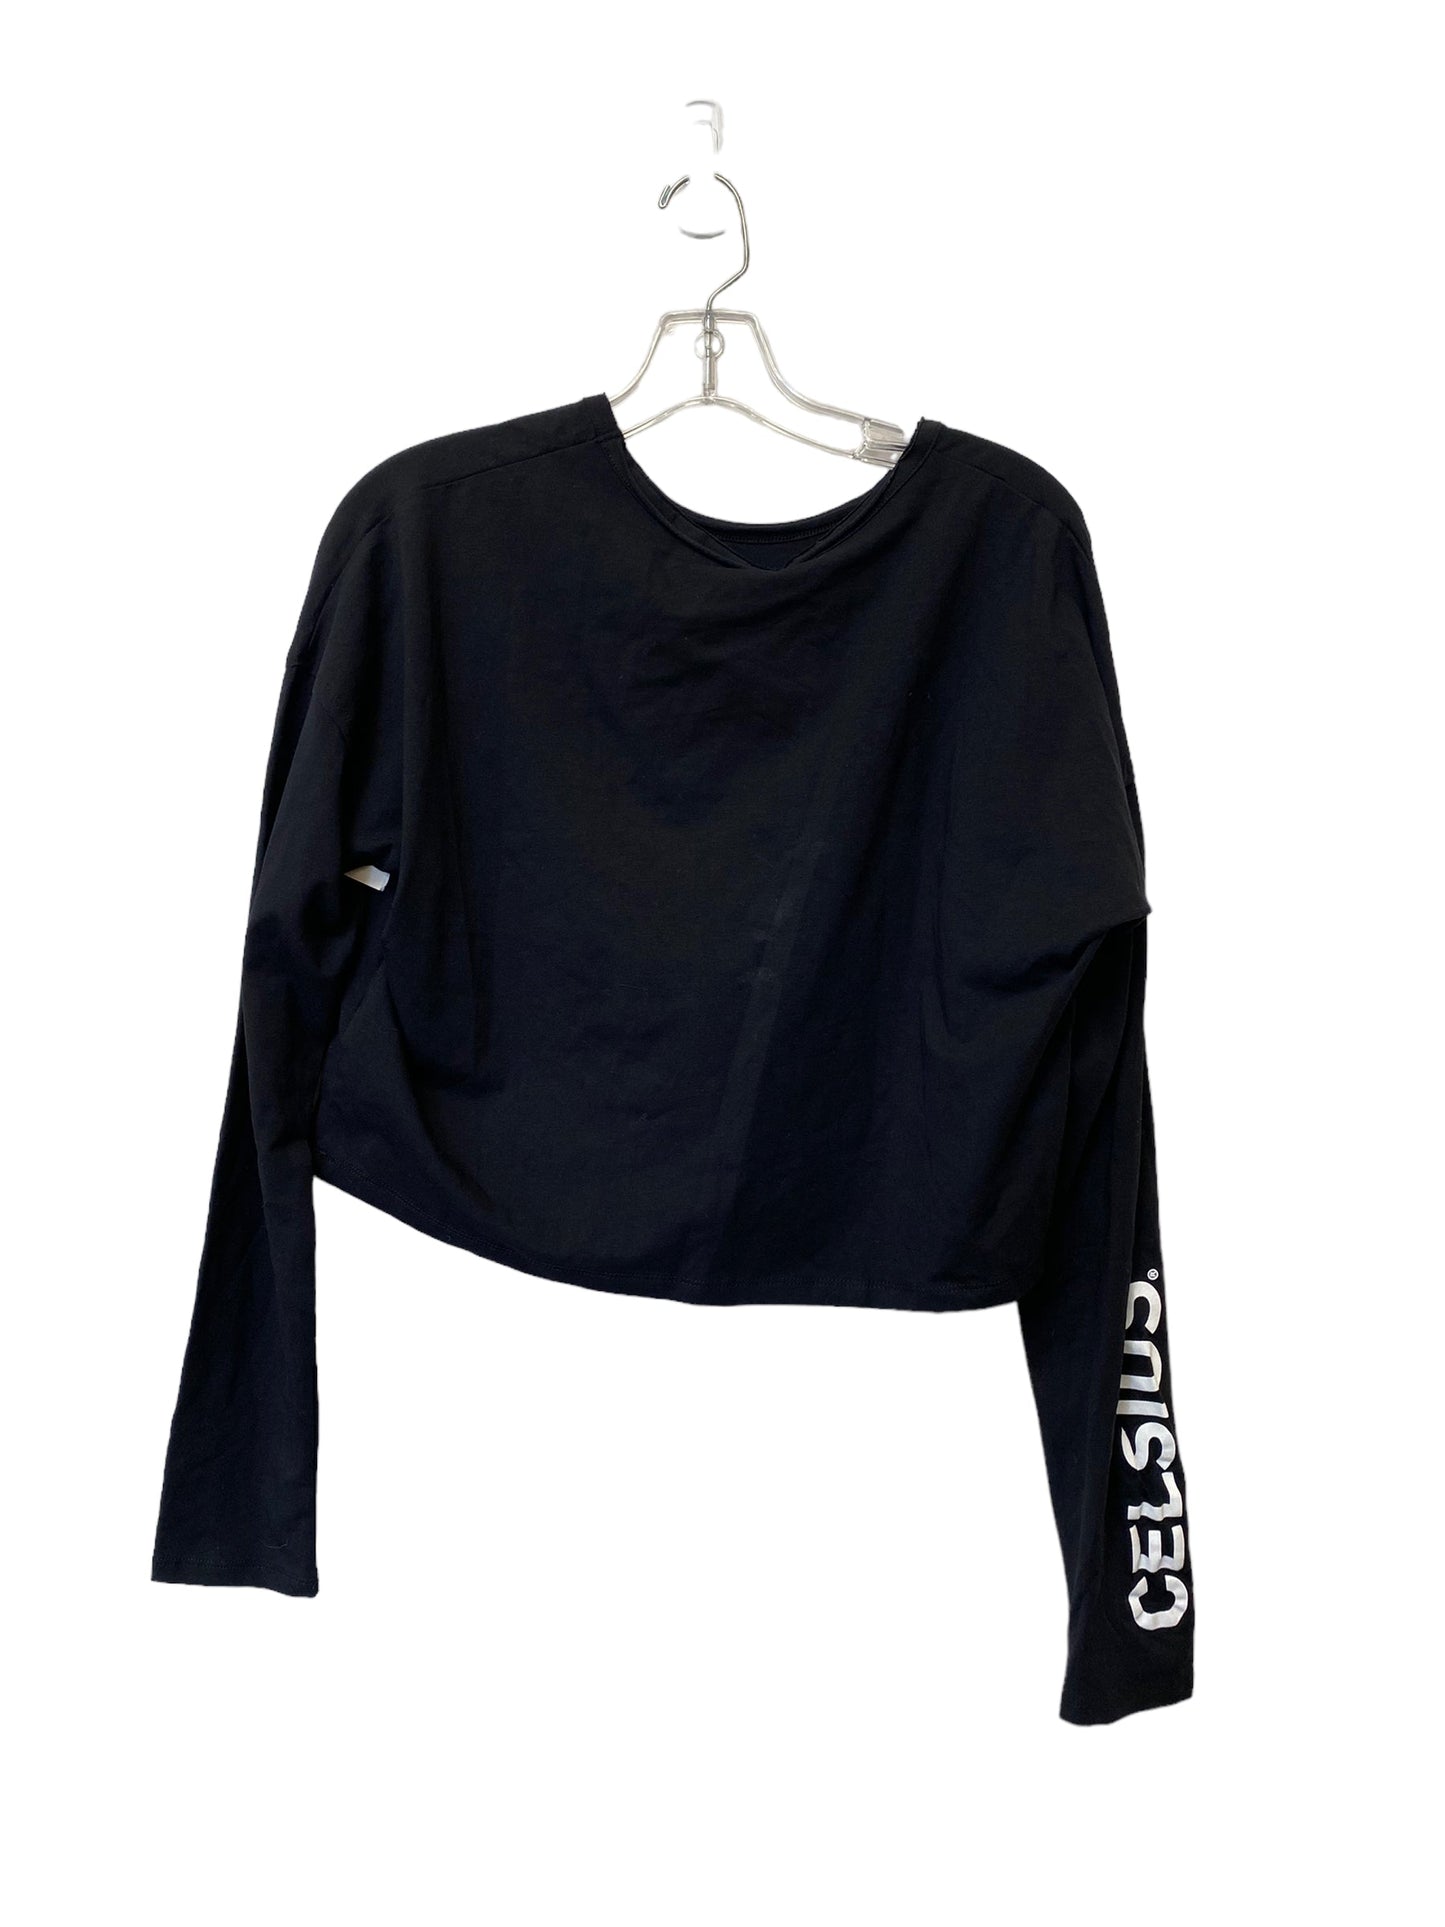 Athletic Top Long Sleeve Crewneck By Fabletics  Size: M